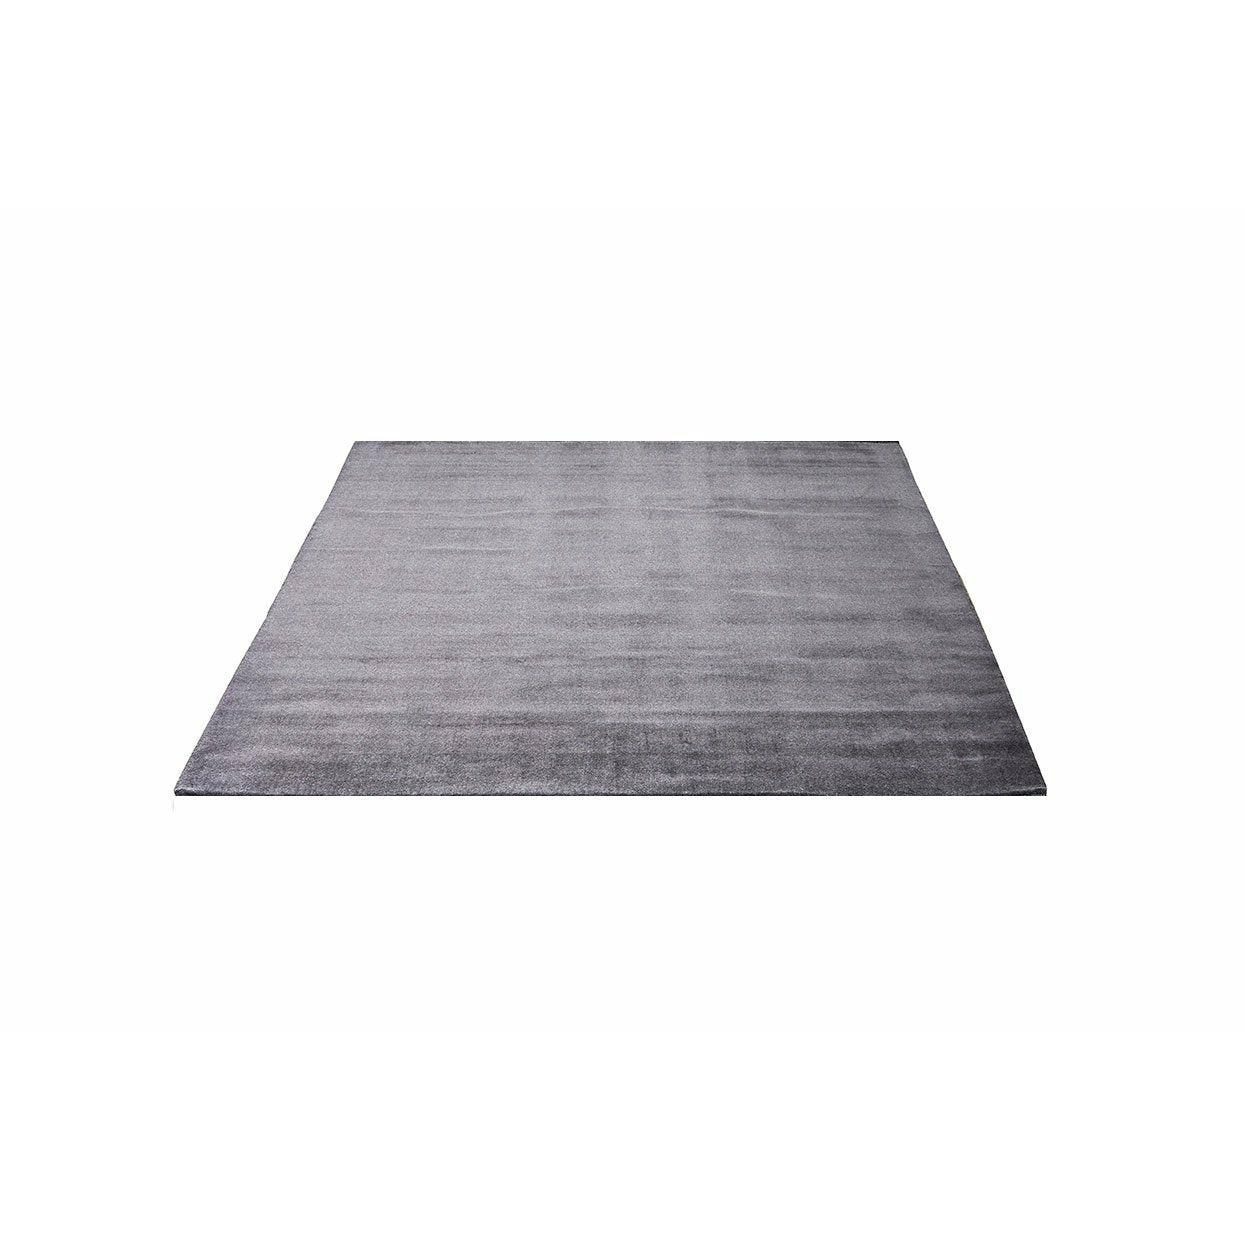 Massimo Earth Bamboo Rug Charcoal Without Fringes, 170x240 Cm